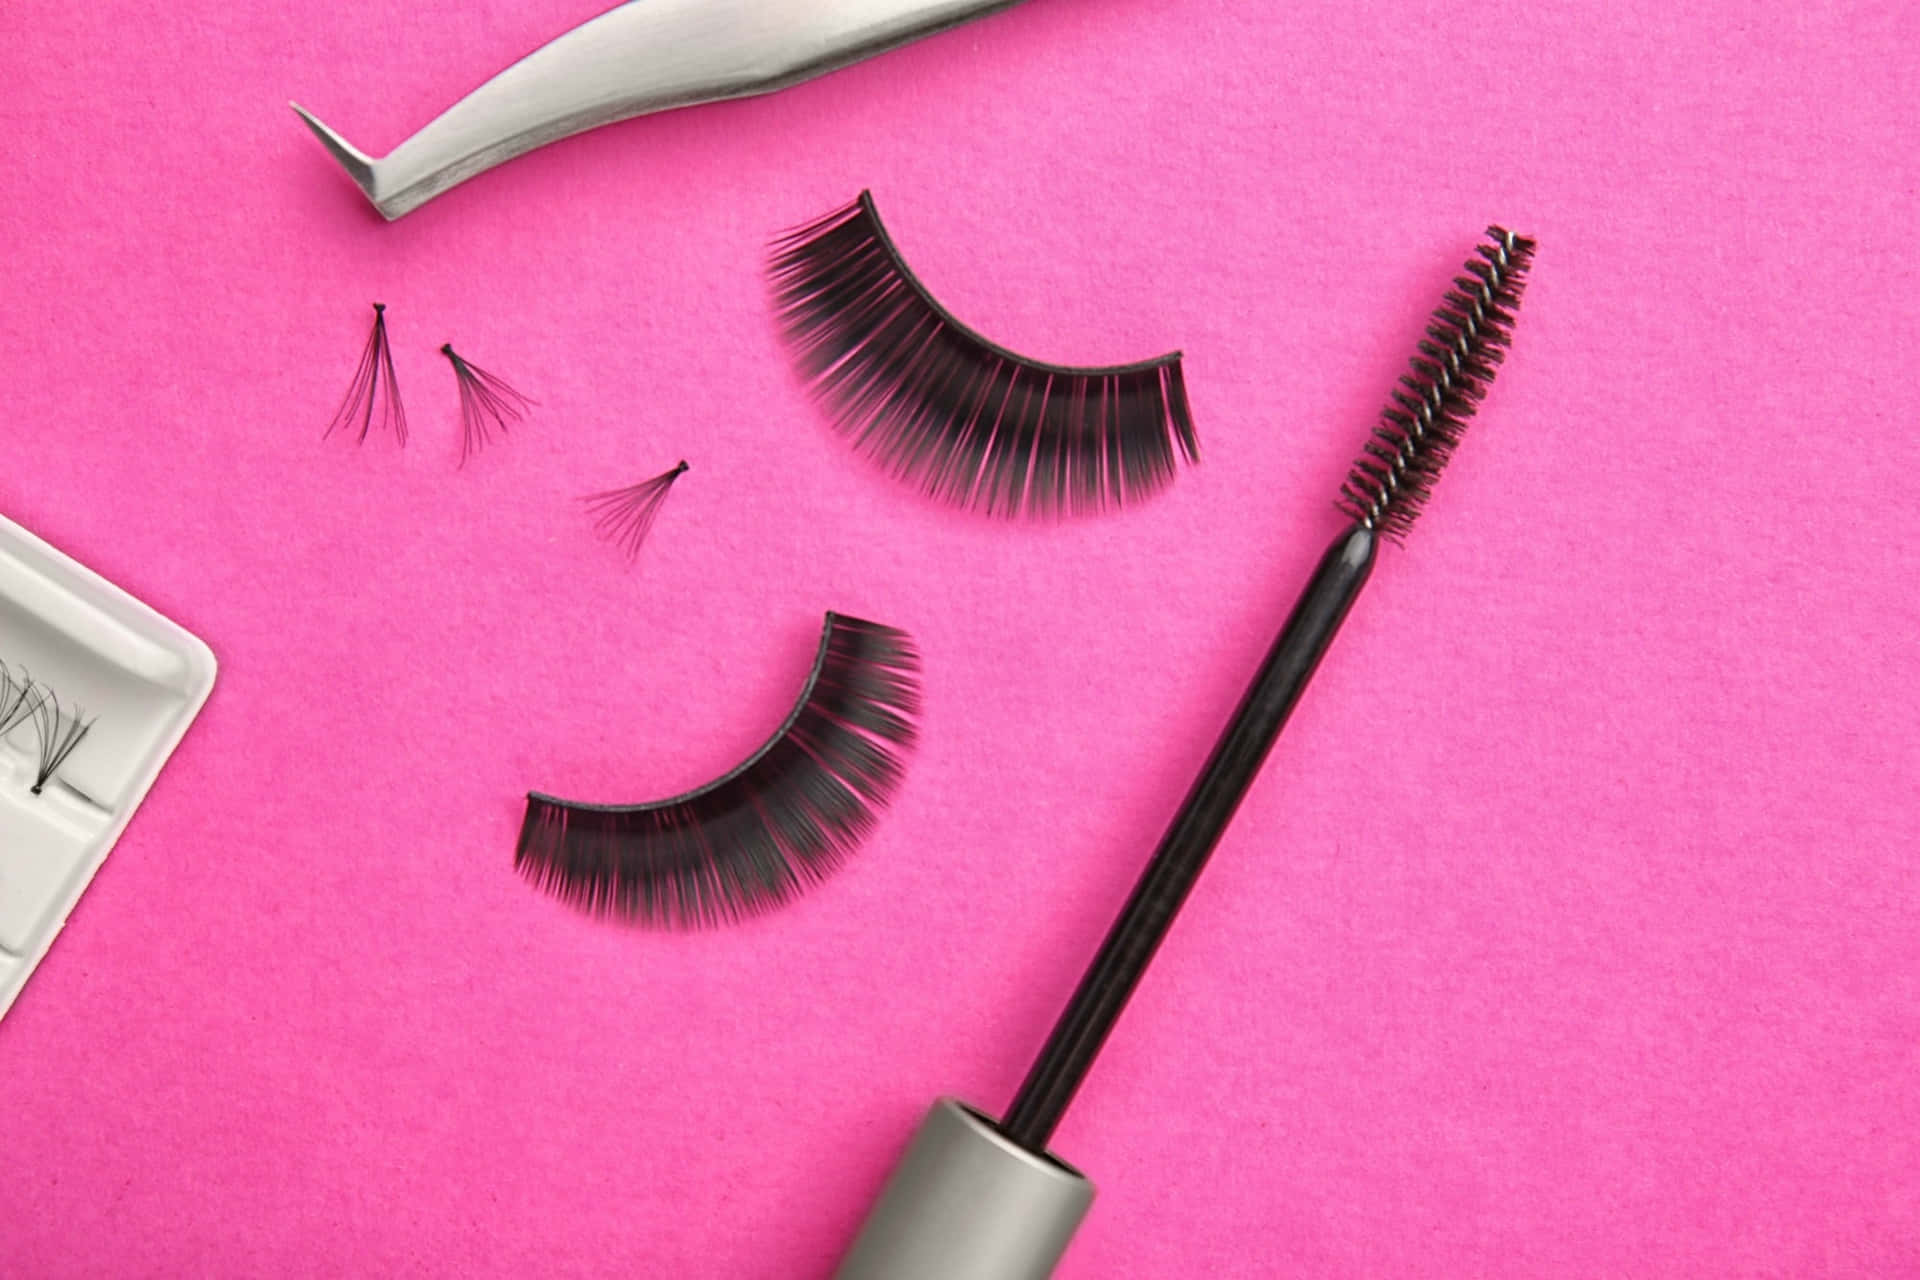 Get the boldest look: Lash out!